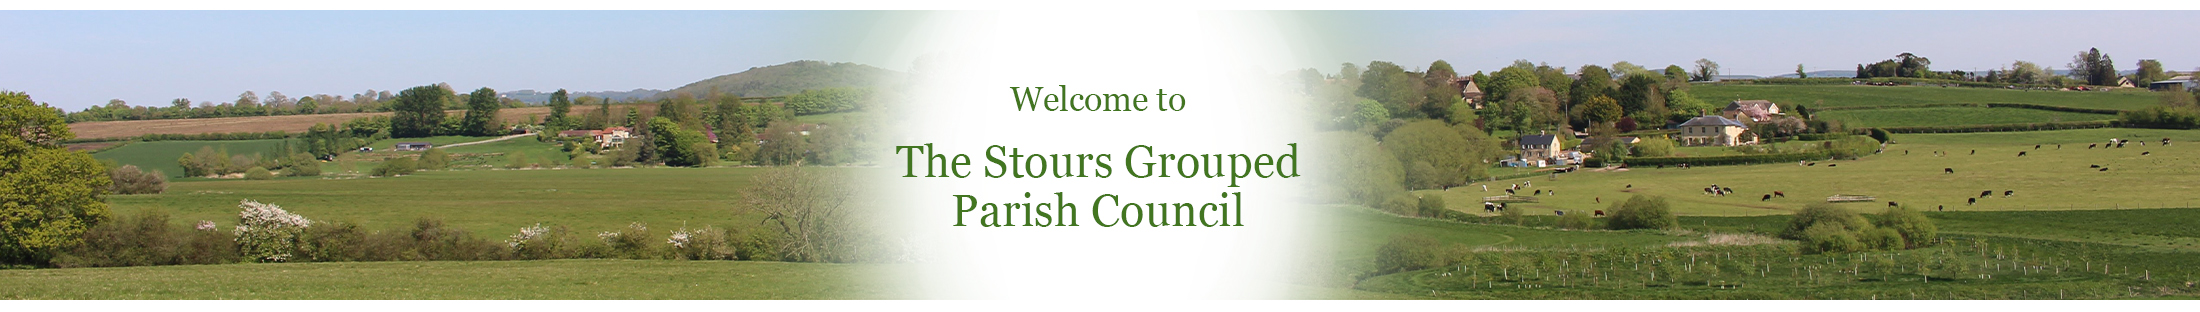 Header Image for The Stours Grouped Parish Council